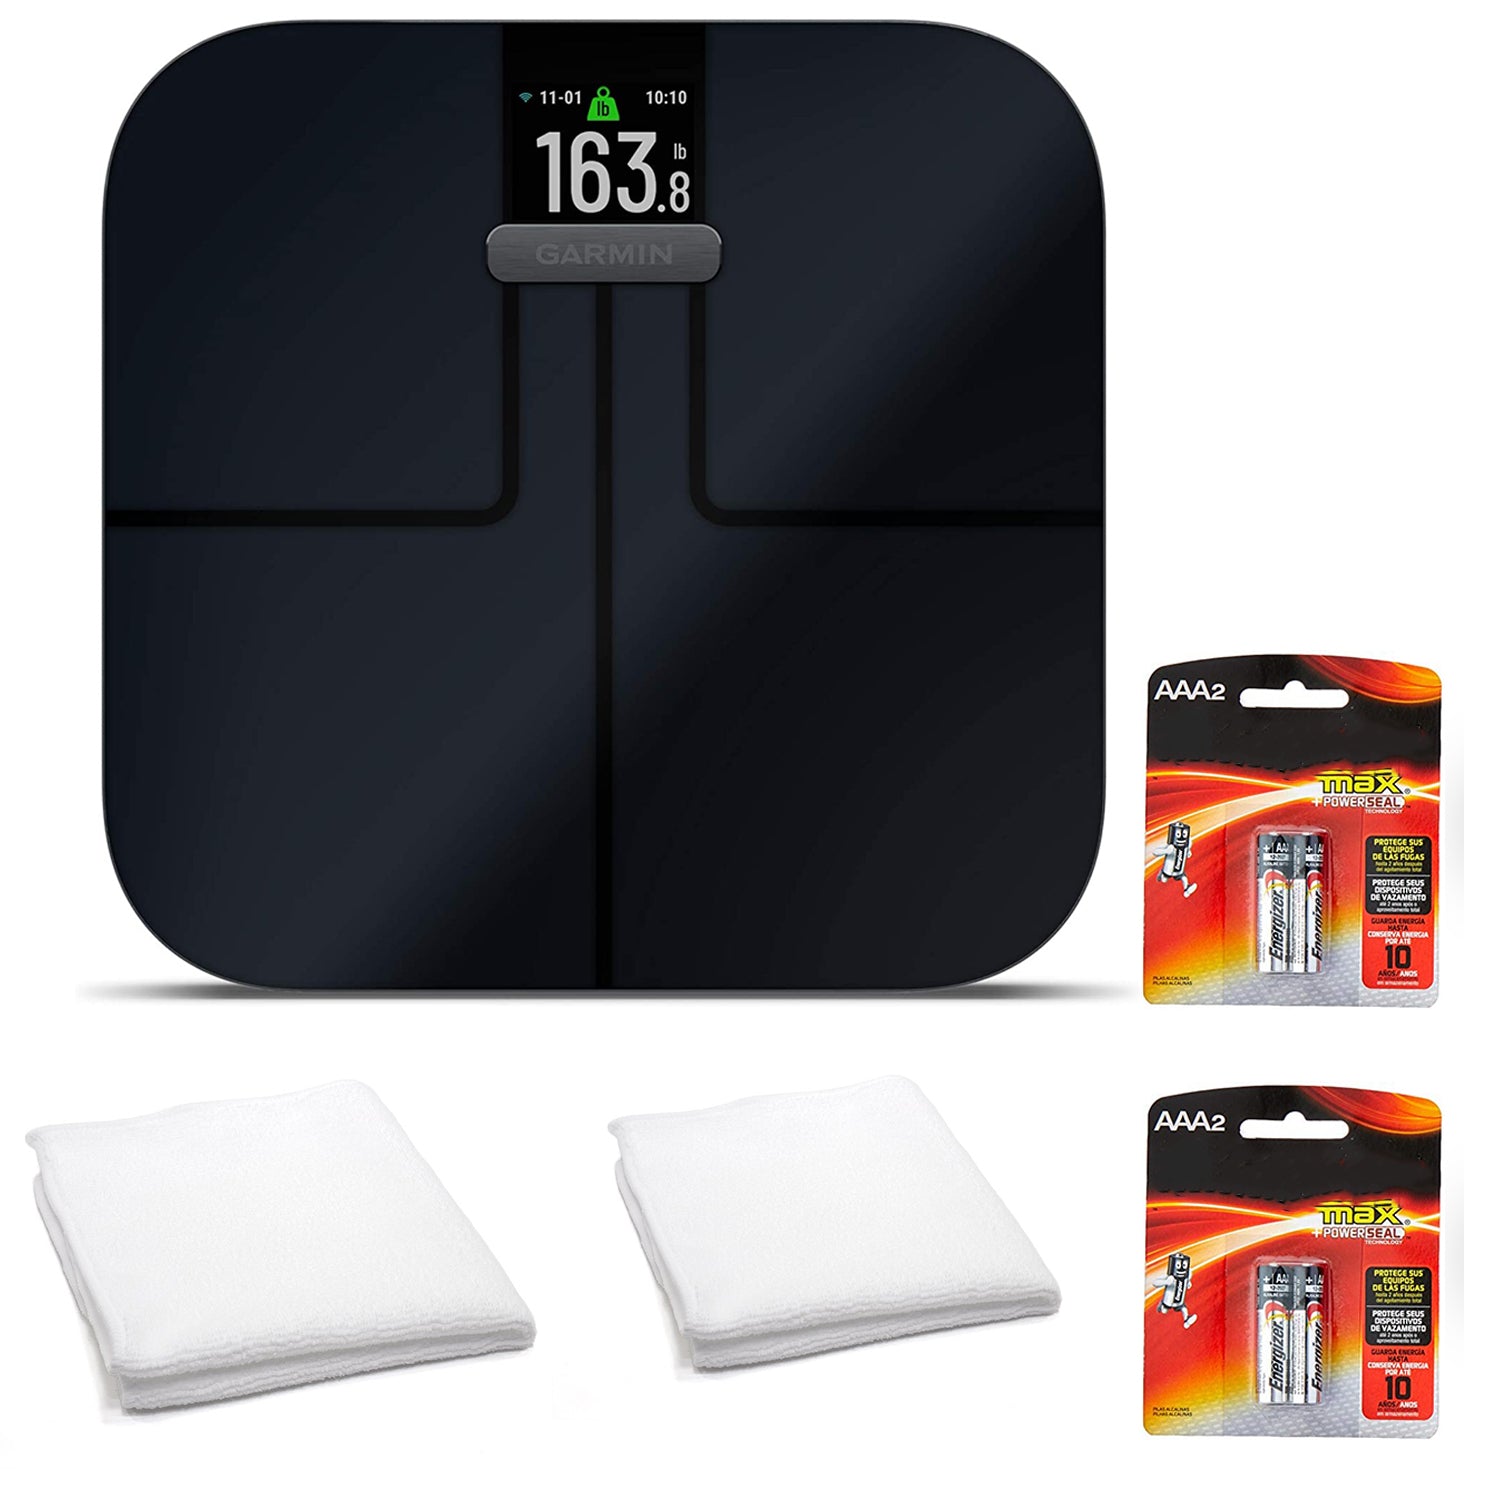 Garmin Index S2 Smart Scale with Wireless Connectivity-Black With Accessories Bundle